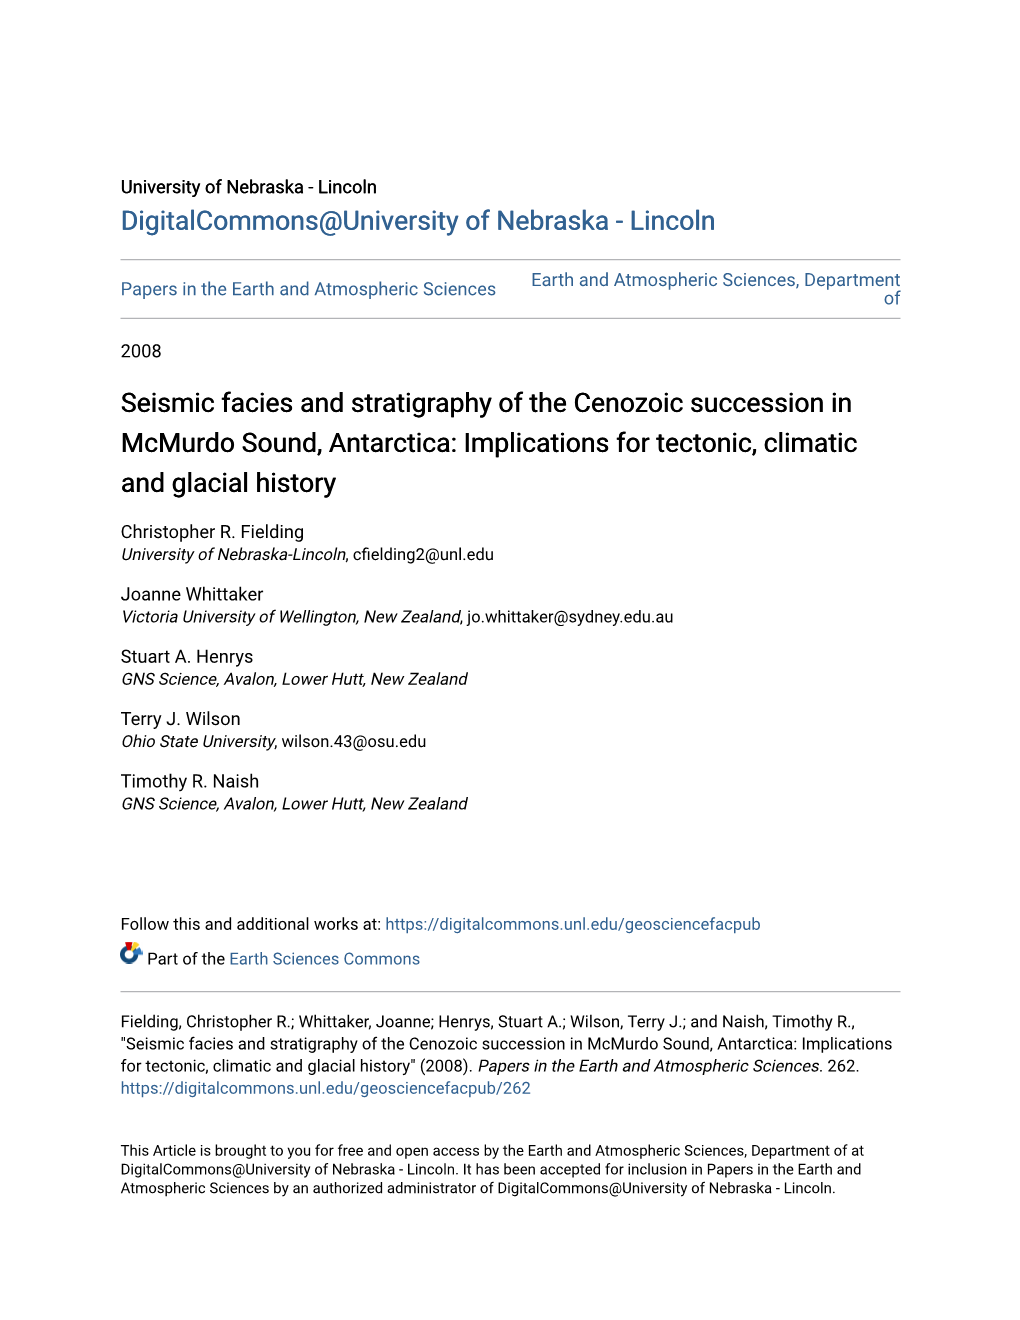 Seismic Facies and Stratigraphy of the Cenozoic Succession in Mcmurdo Sound, Antarctica: Implications for Tectonic, Climatic and Glacial History